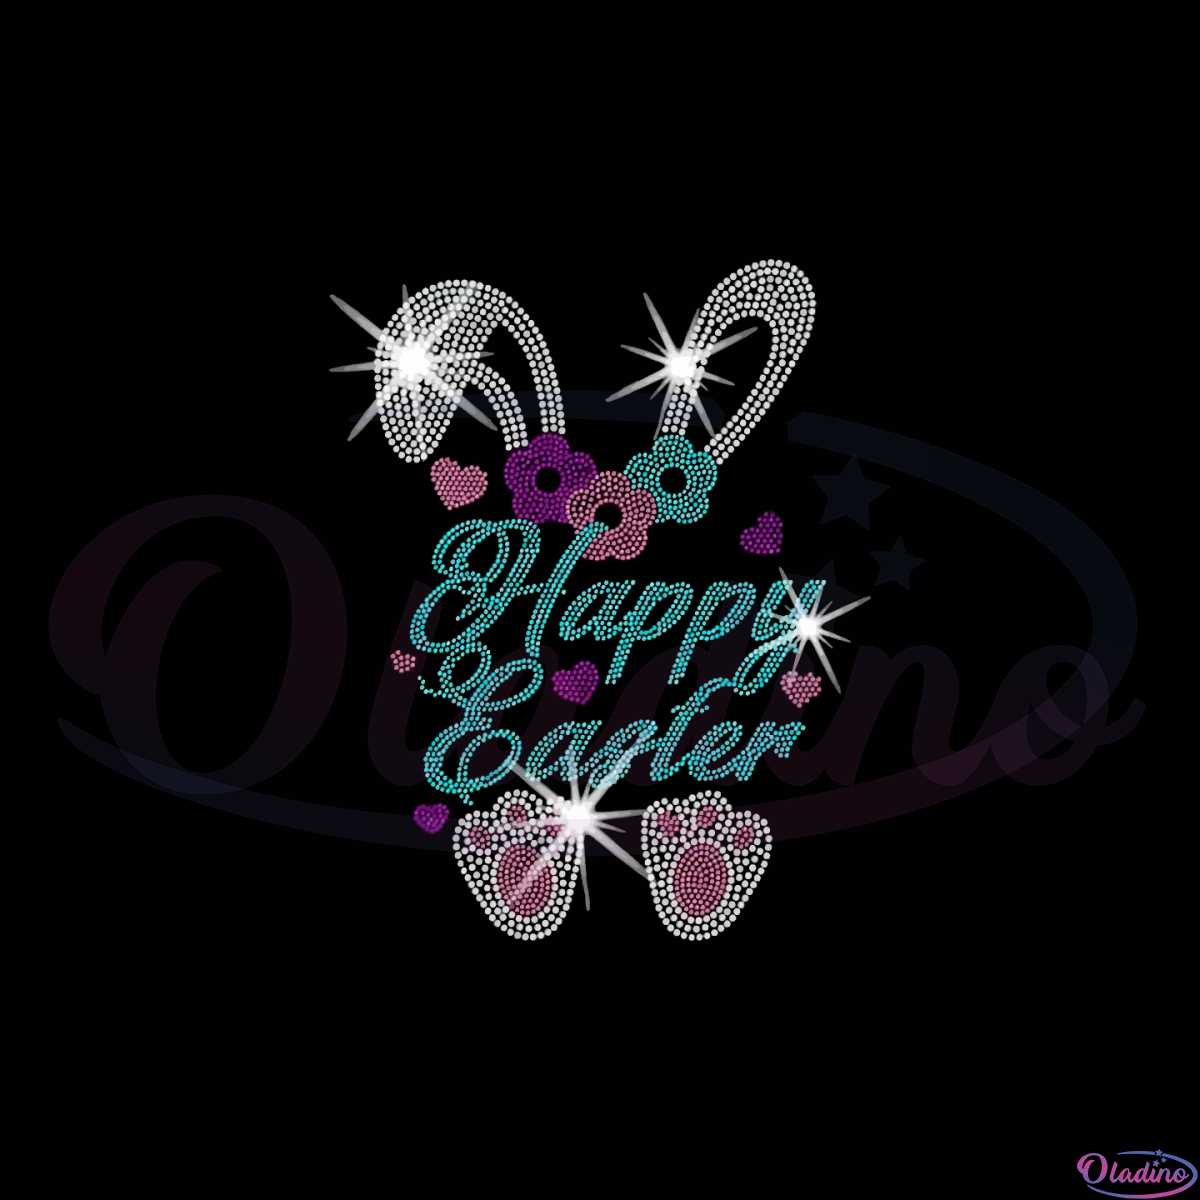 happy-easter-cute-bunny-sparkle-spangle-bling-svg-cutting-files